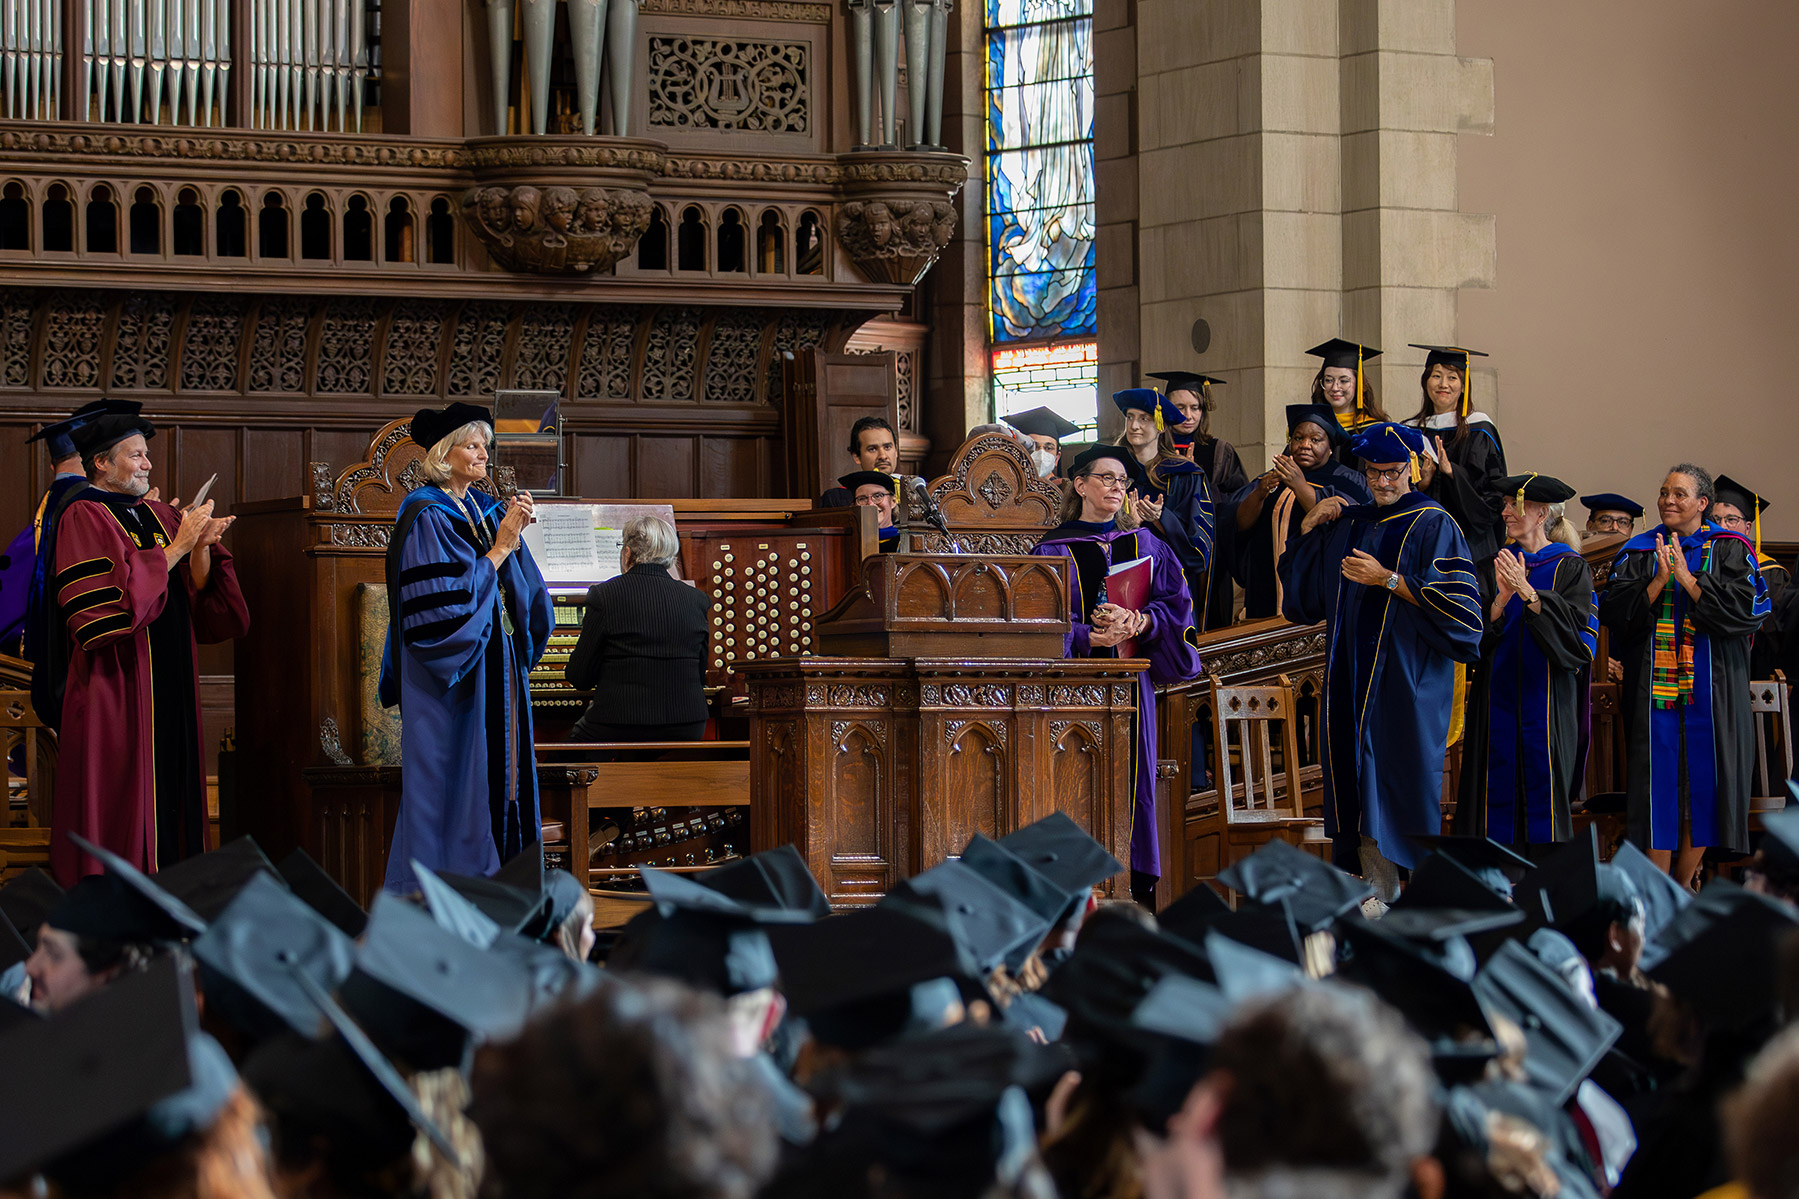 Person on stage surrounded by professors standing in formal graduation attire applauding with students in the front in caps and gowns applauding.